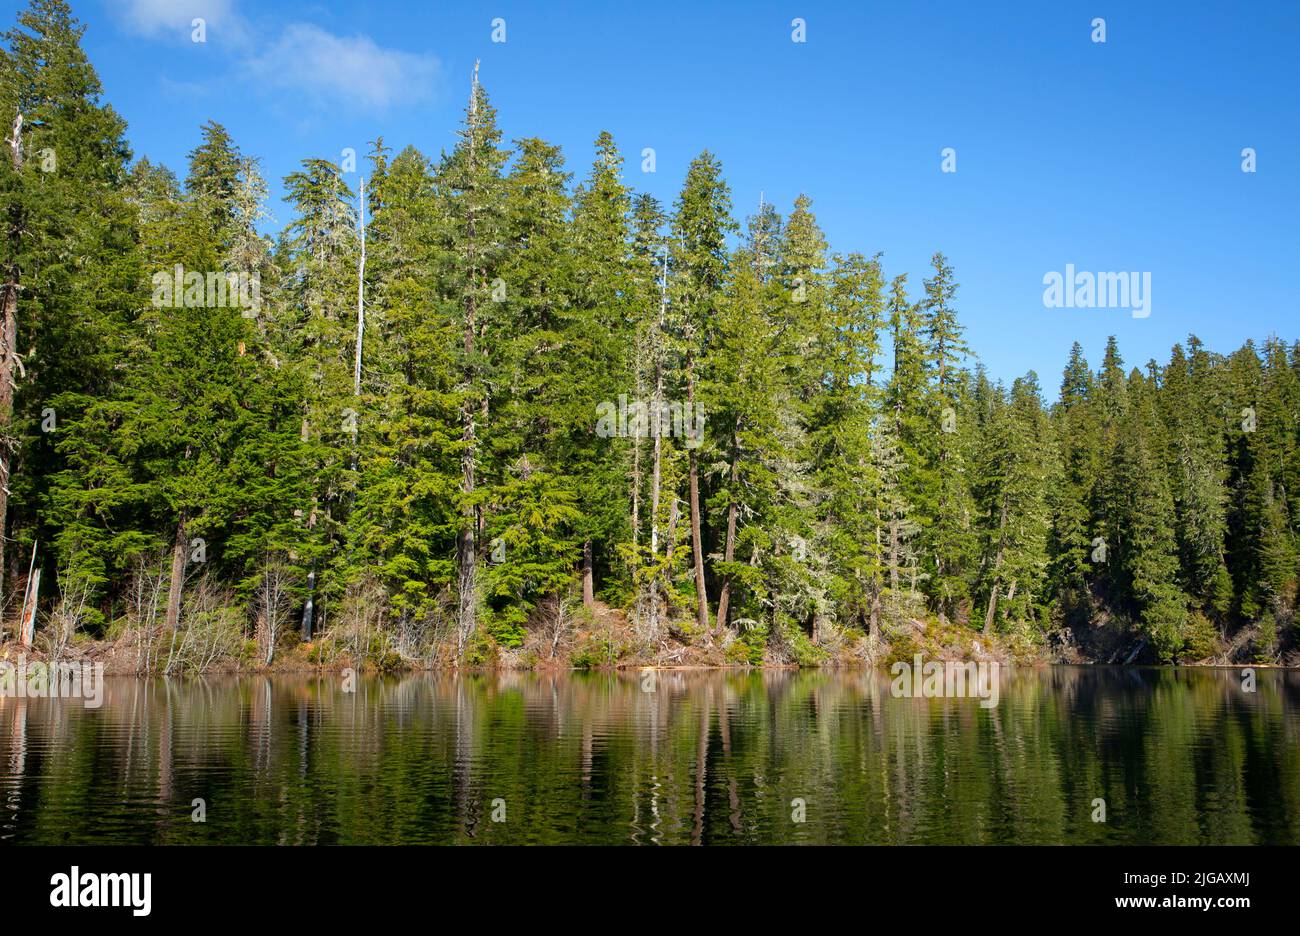 Fish Lake, Willamette National Forest, McKenzie Pass-Santiam Pass National Scenic Byway, Oregon Stock Photo